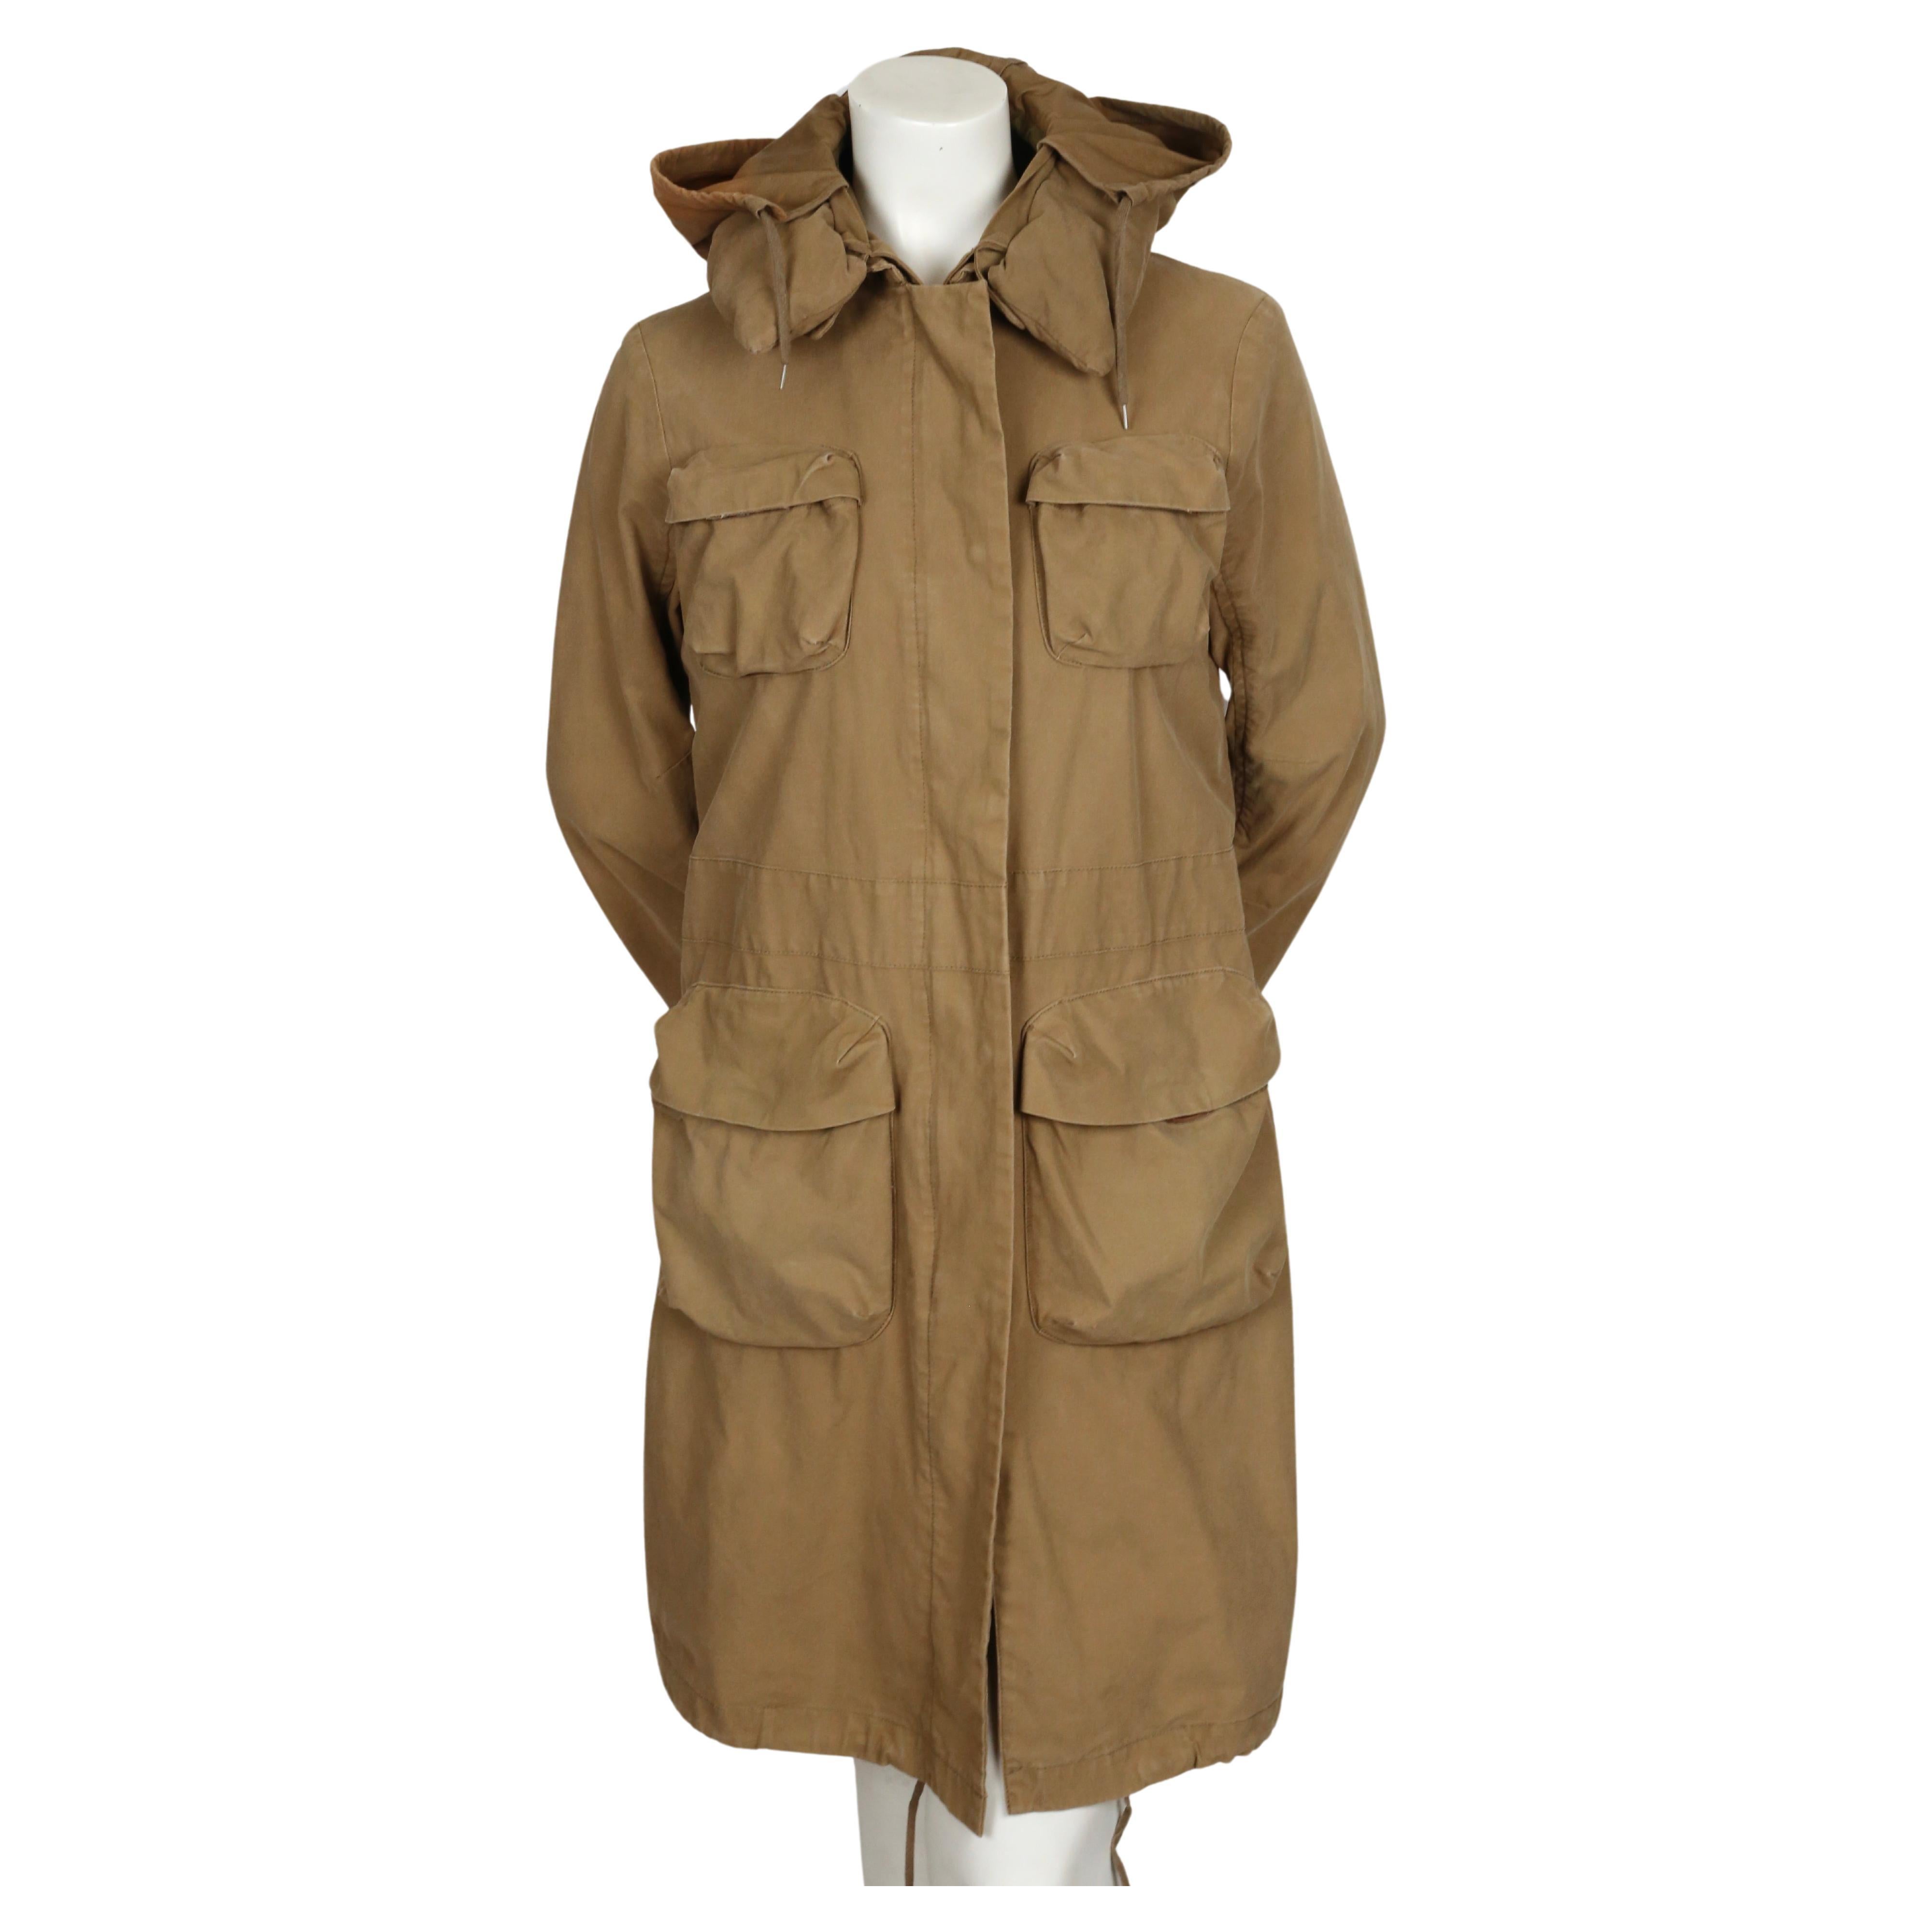 Khaki brown cotton parka coat with padded collar and bondage straps designed by Helmut Lang as seen on the fall 1999 runway. Italian size 40. Approximate measurements: shoulder 16.33